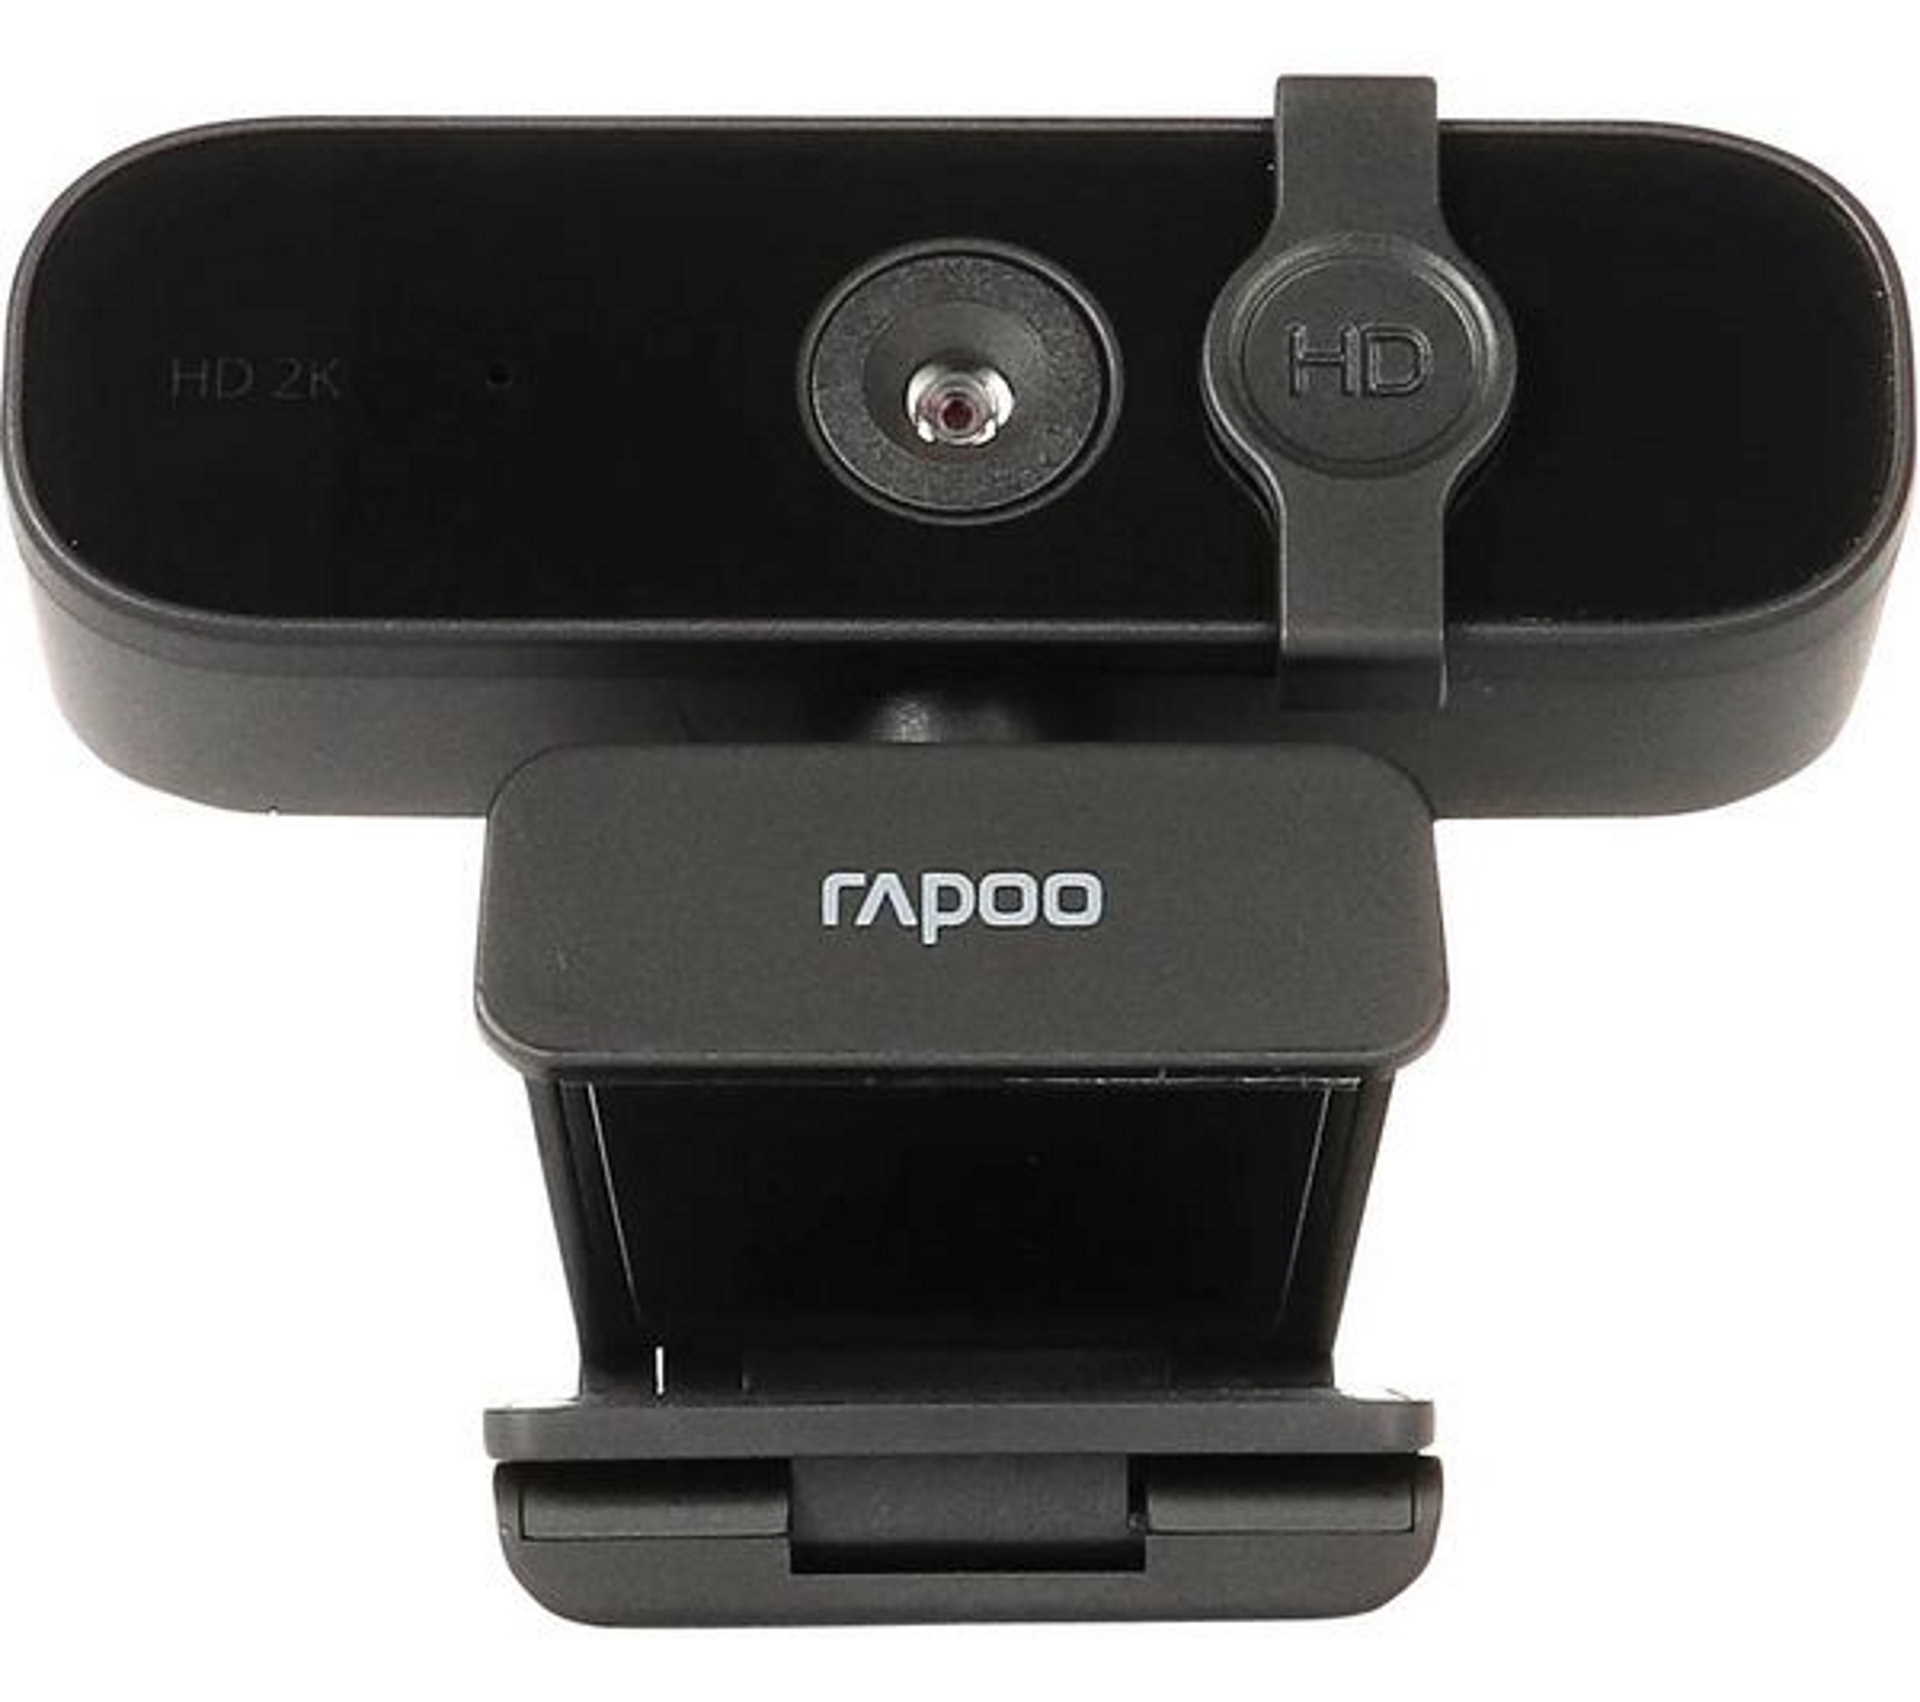 Rapoo XW170, XW180, and XW2K are serious entries in the webcam world